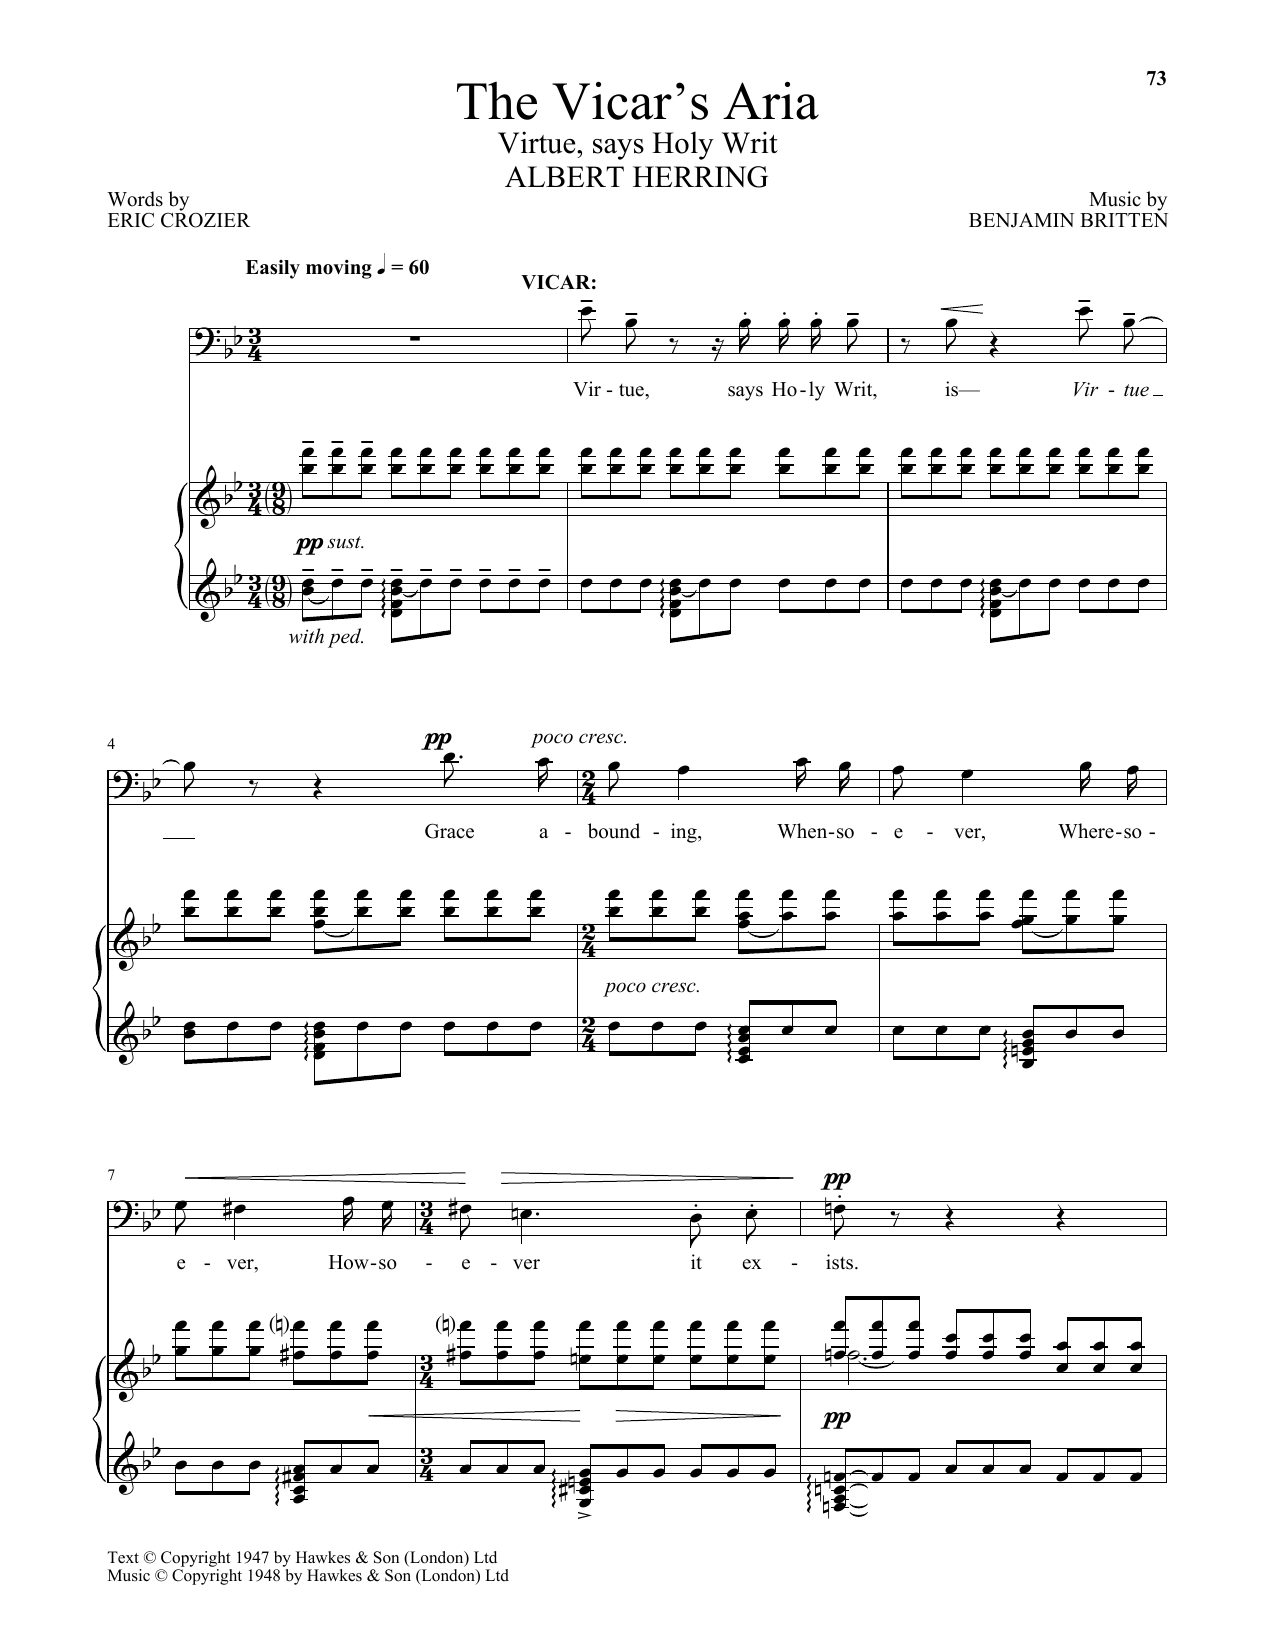 Benjamin Britten The Vicar's Aria (Virtue, says Holy Writ) (from Albert Herring) sheet music preview music notes and score for Piano & Vocal including 3 page(s)